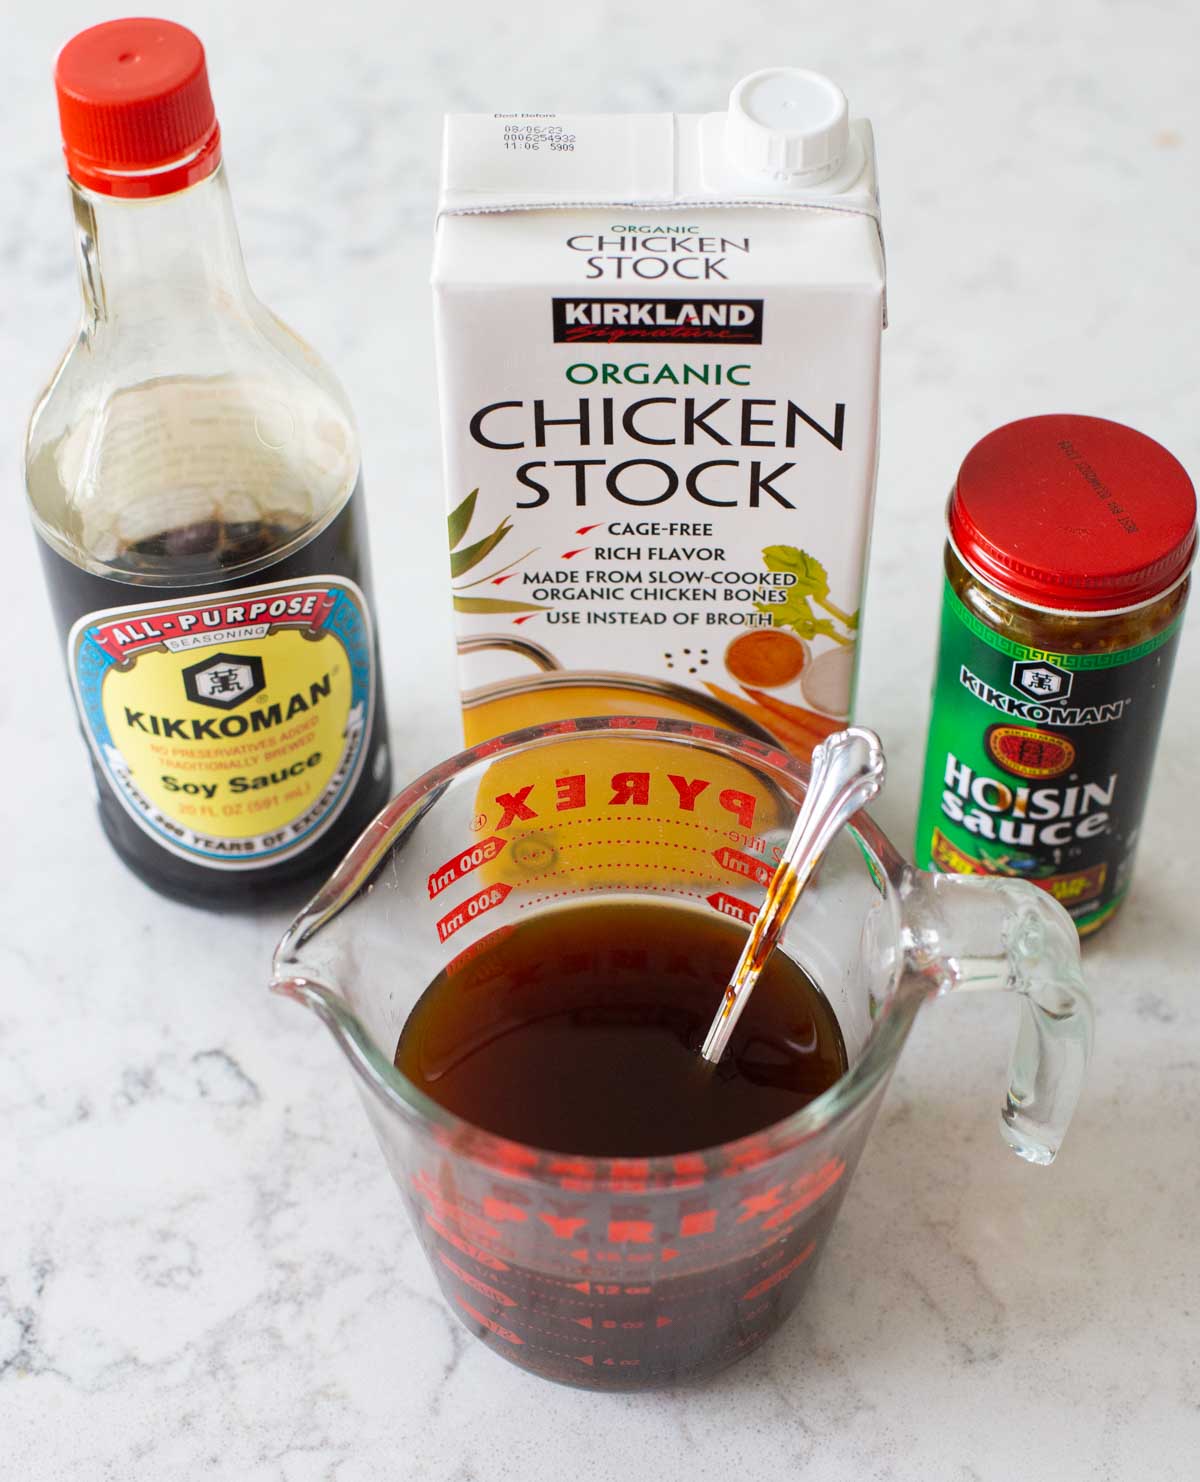 Chicken stock, soy sauce, and hoisin sauce are mixed together in a measuring cup.